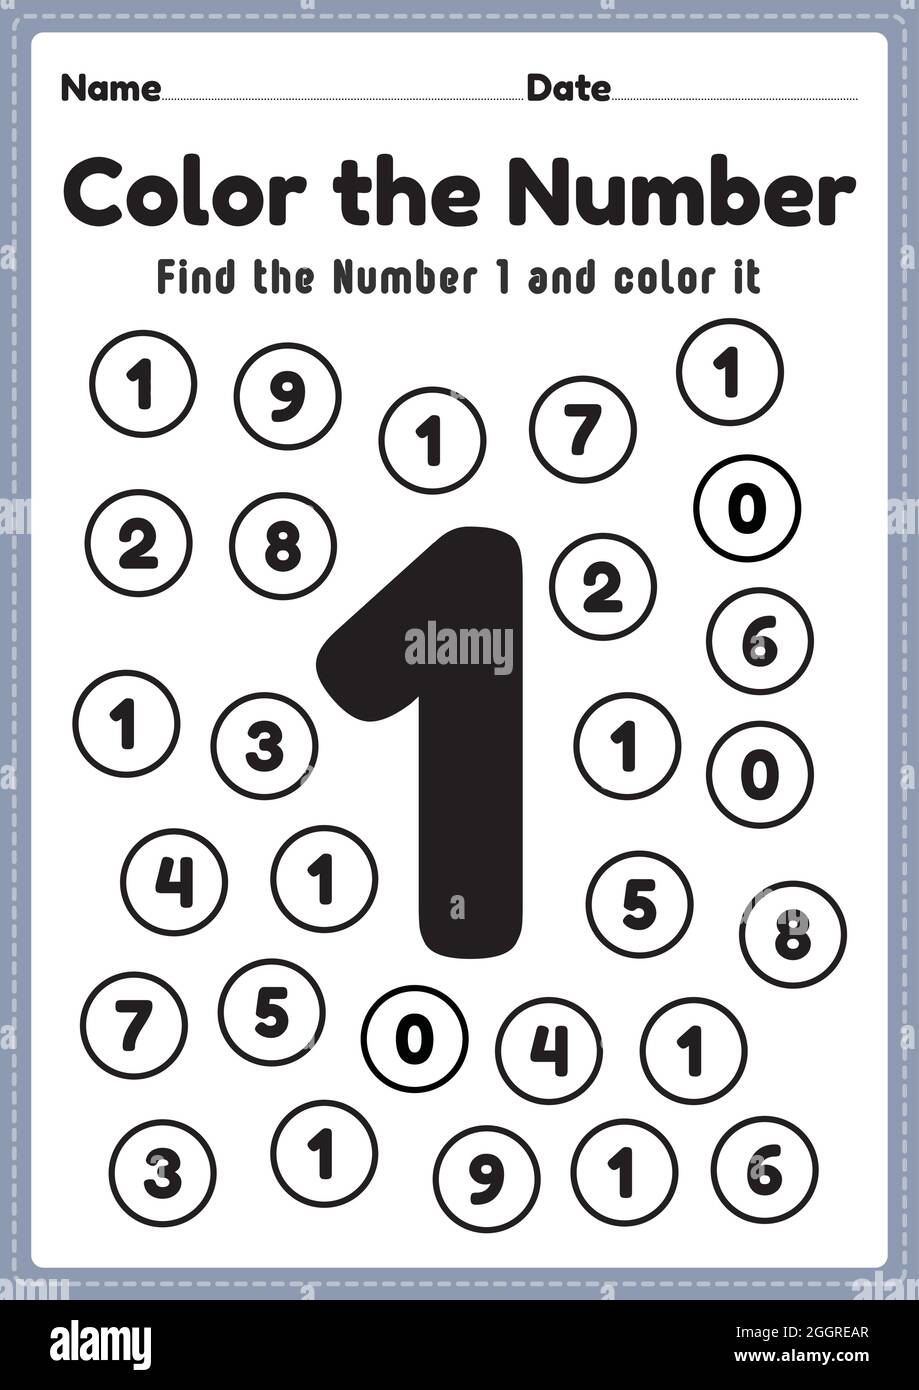 coloring numbers number 1 worksheet math printable sheet for preschool and kindergarten kids activity to learn basic mathematics skills stock vector image art alamy